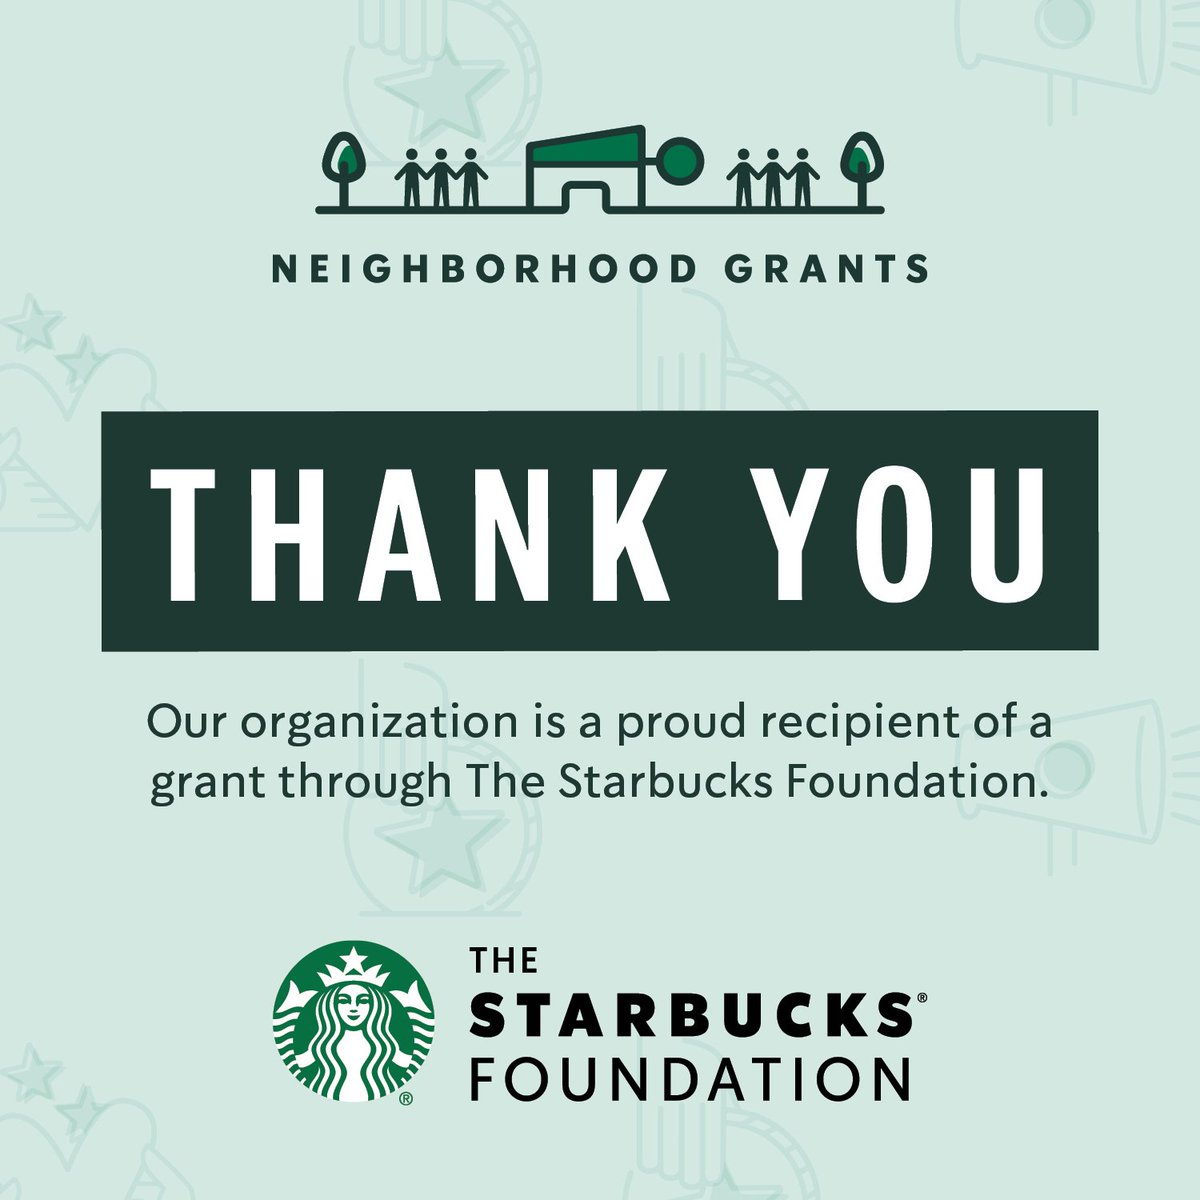 A BIG thanks to @Starbucks partners & The Starbucks Foundation for recognizing how we are making our communities stronger. #RamisHeartCovidMemorial is proud to be selected for #TheStarbucksFoundation #NeighborhoodGrants, thanks to local Starbucks employees in our community. 💛💚